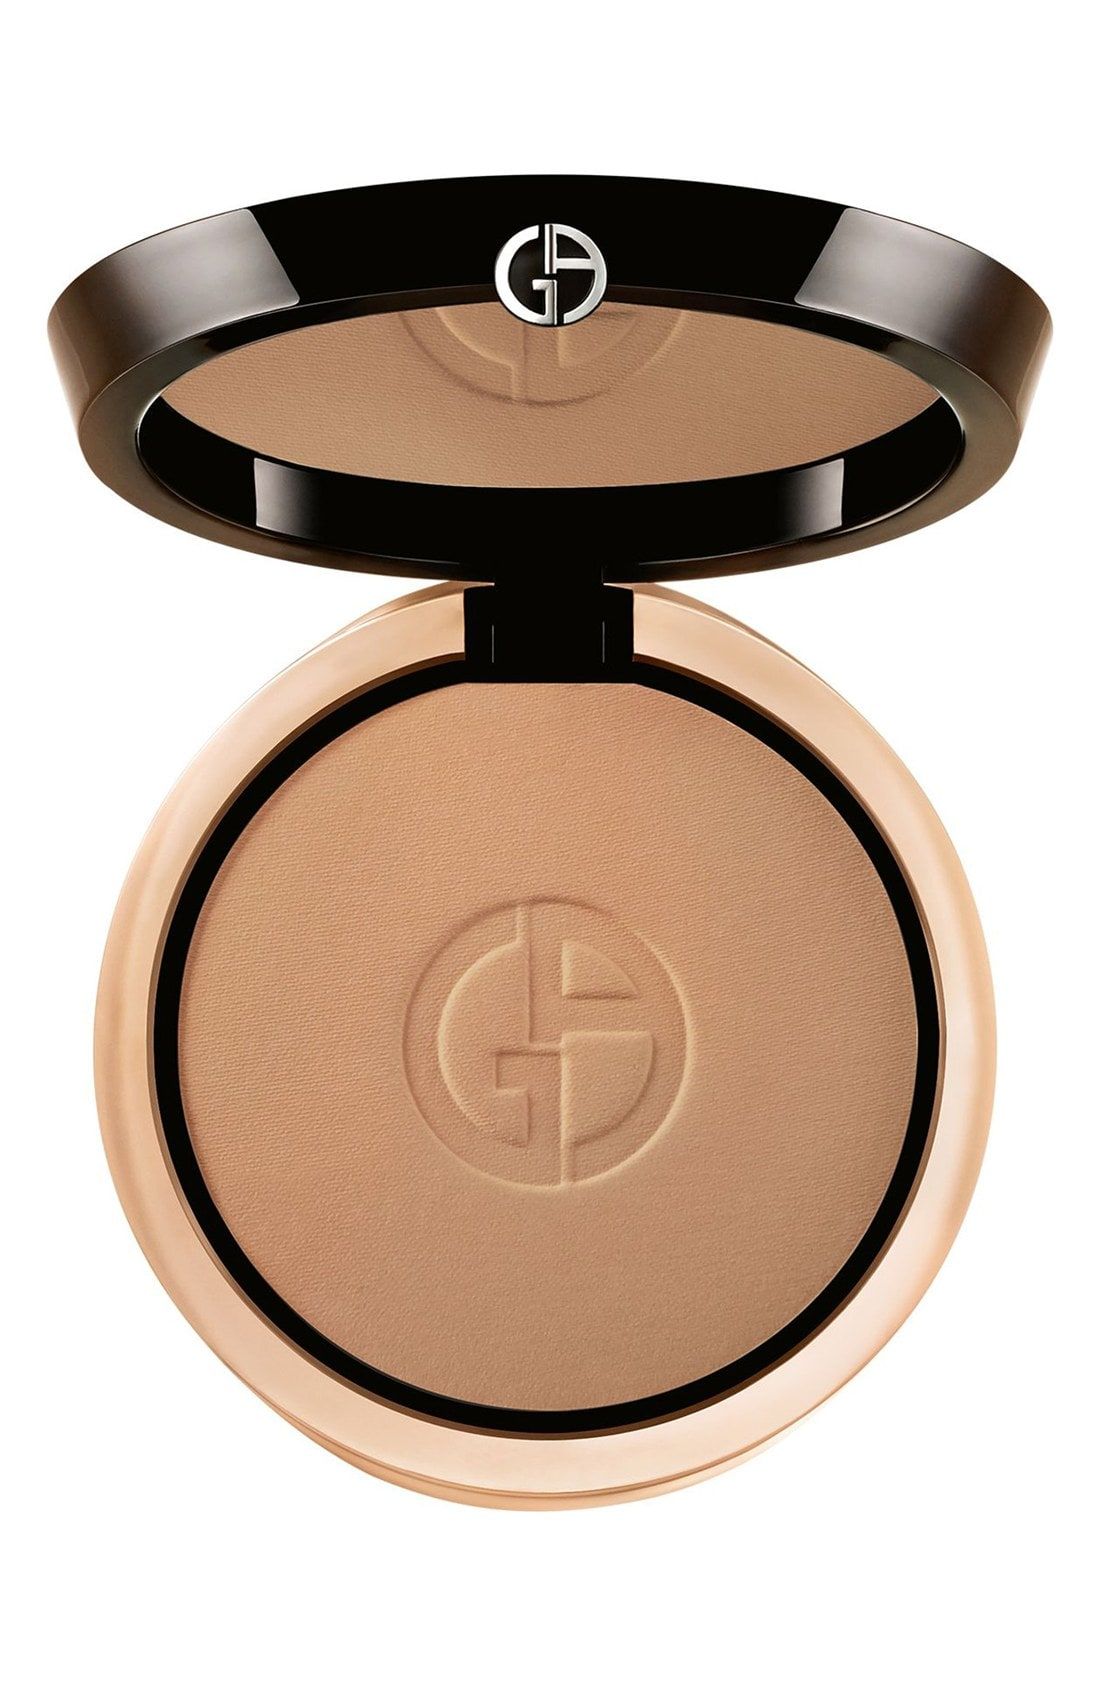 recommended powder foundation